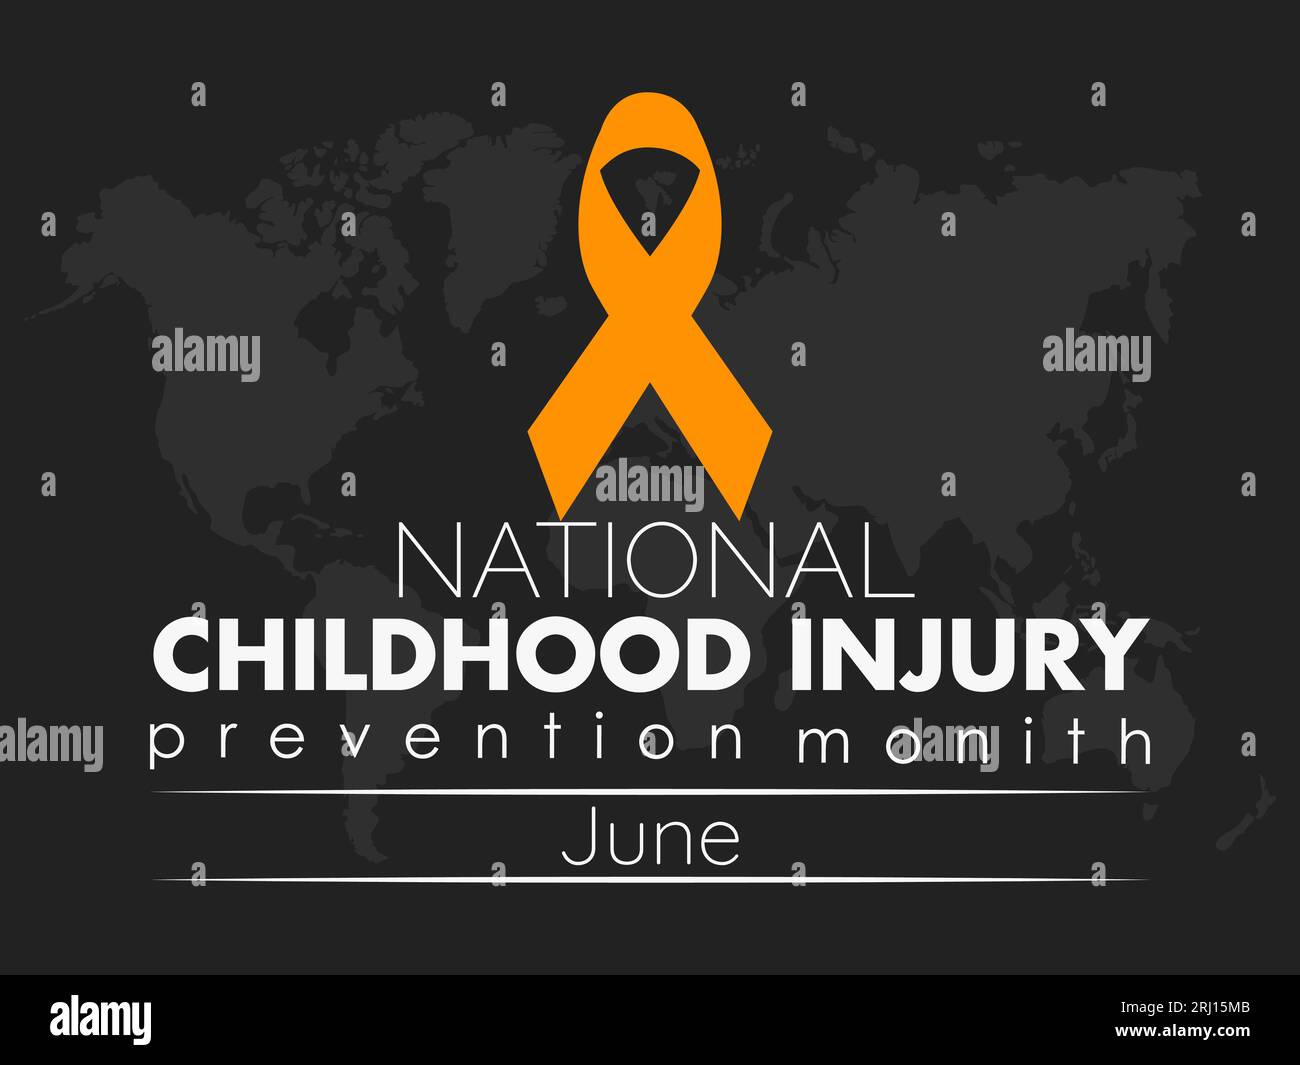 National Childhood Injury Prevention Month Promotes Awareness ...